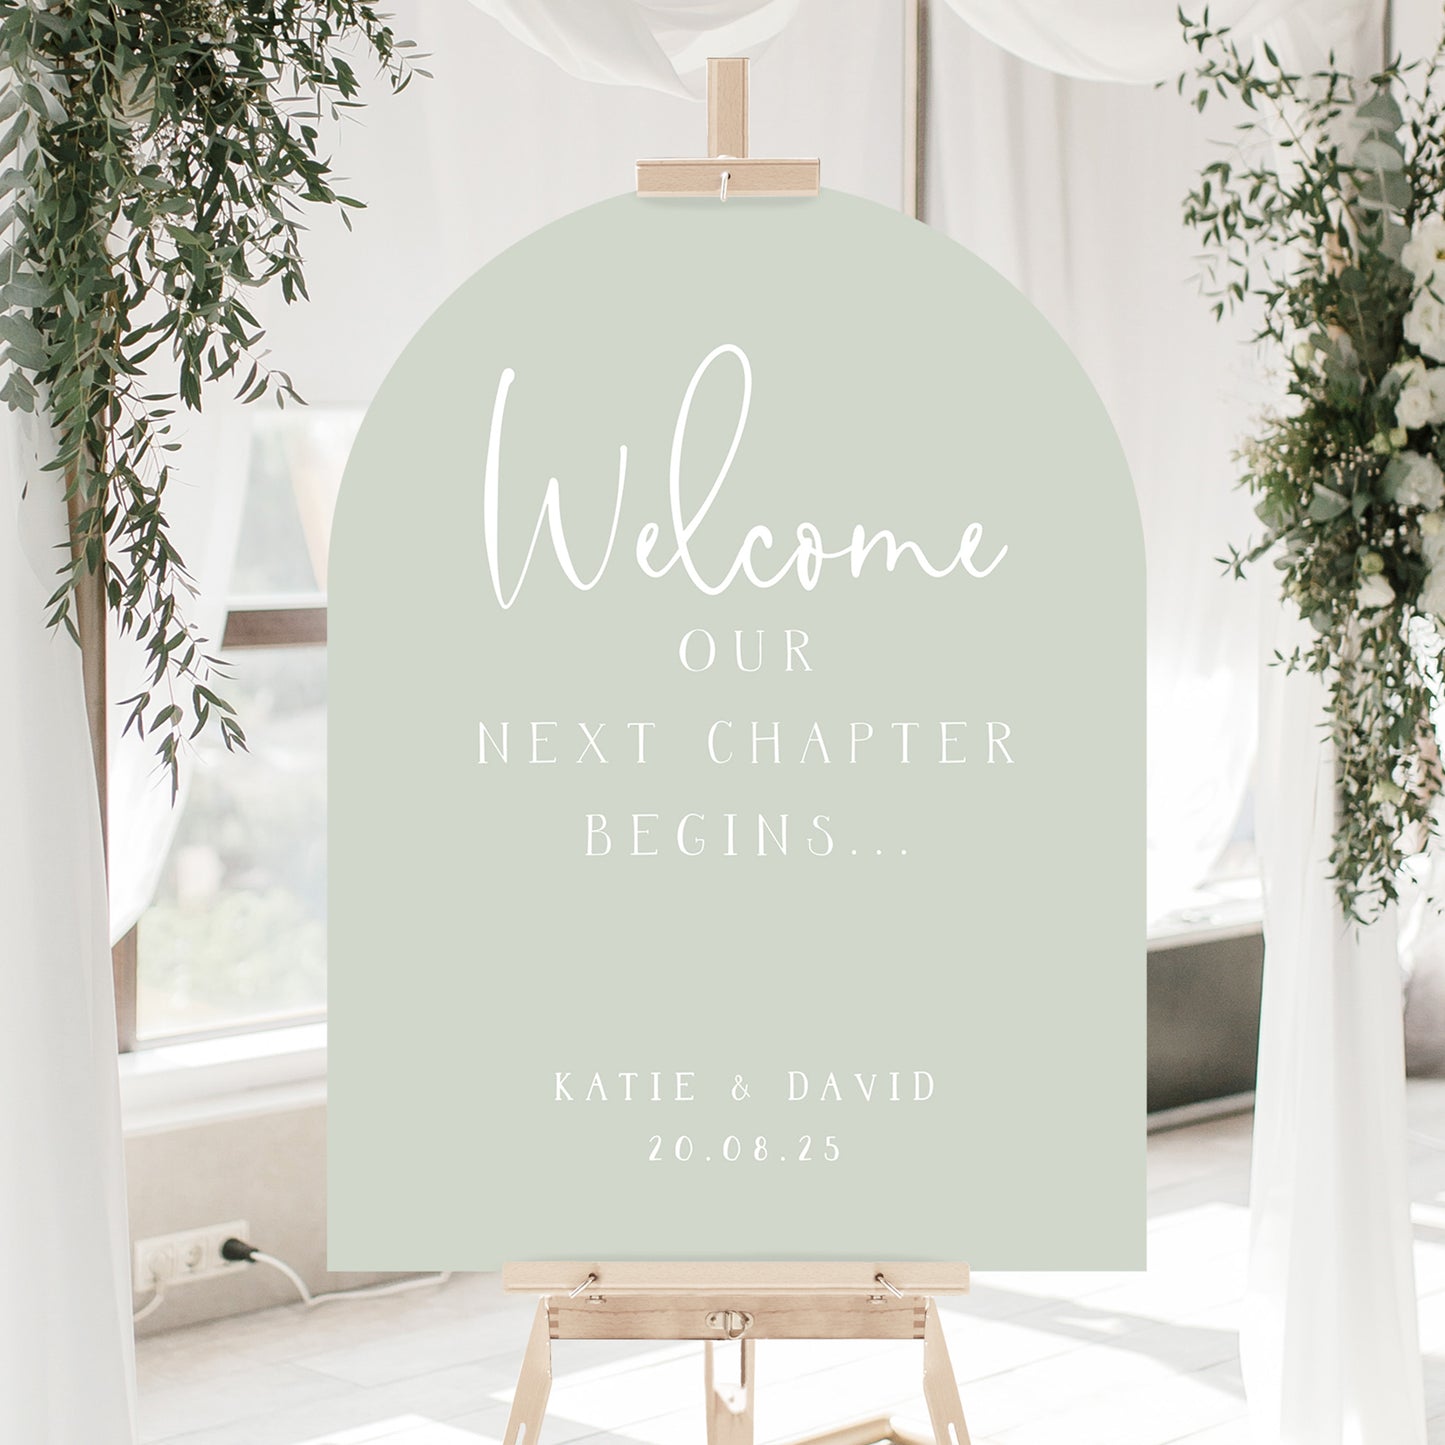 Sage green arched wedding sign with quote